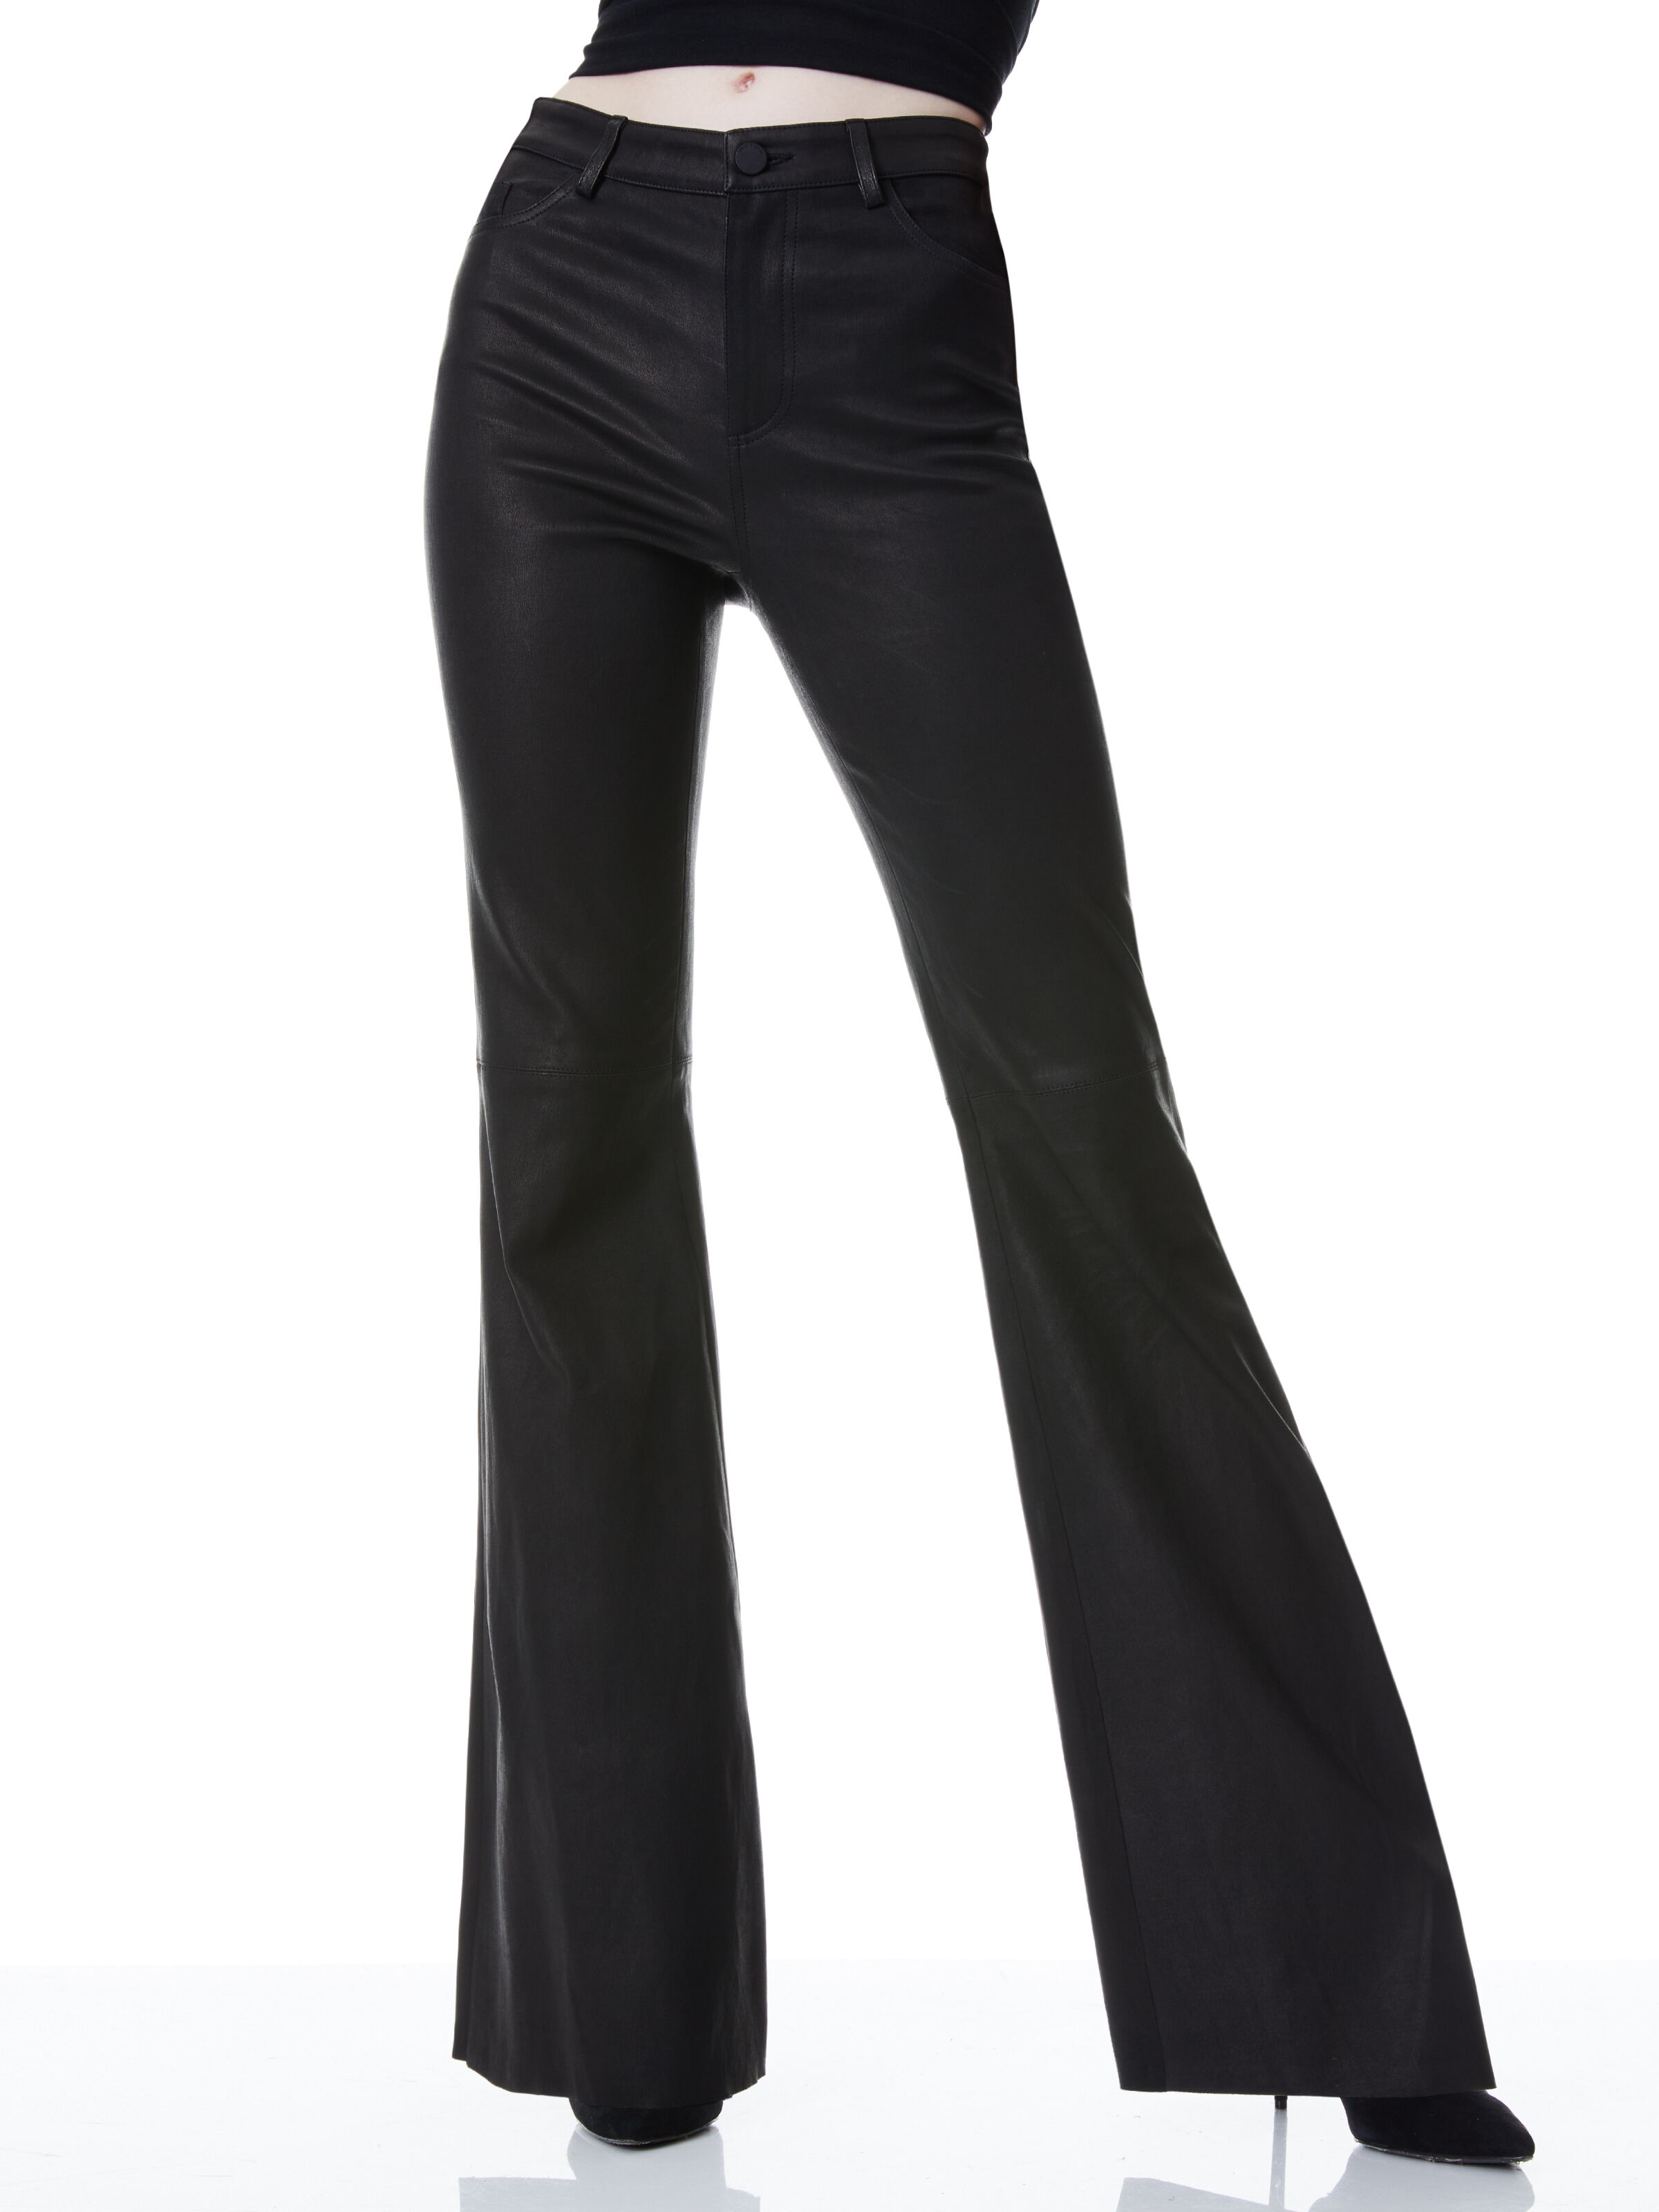 Women Solid High Waist Zipper Pants Trousers Slim Pocket Leather Pants Note  Please Buy One Or Two Sizes Larger - Walmart.com